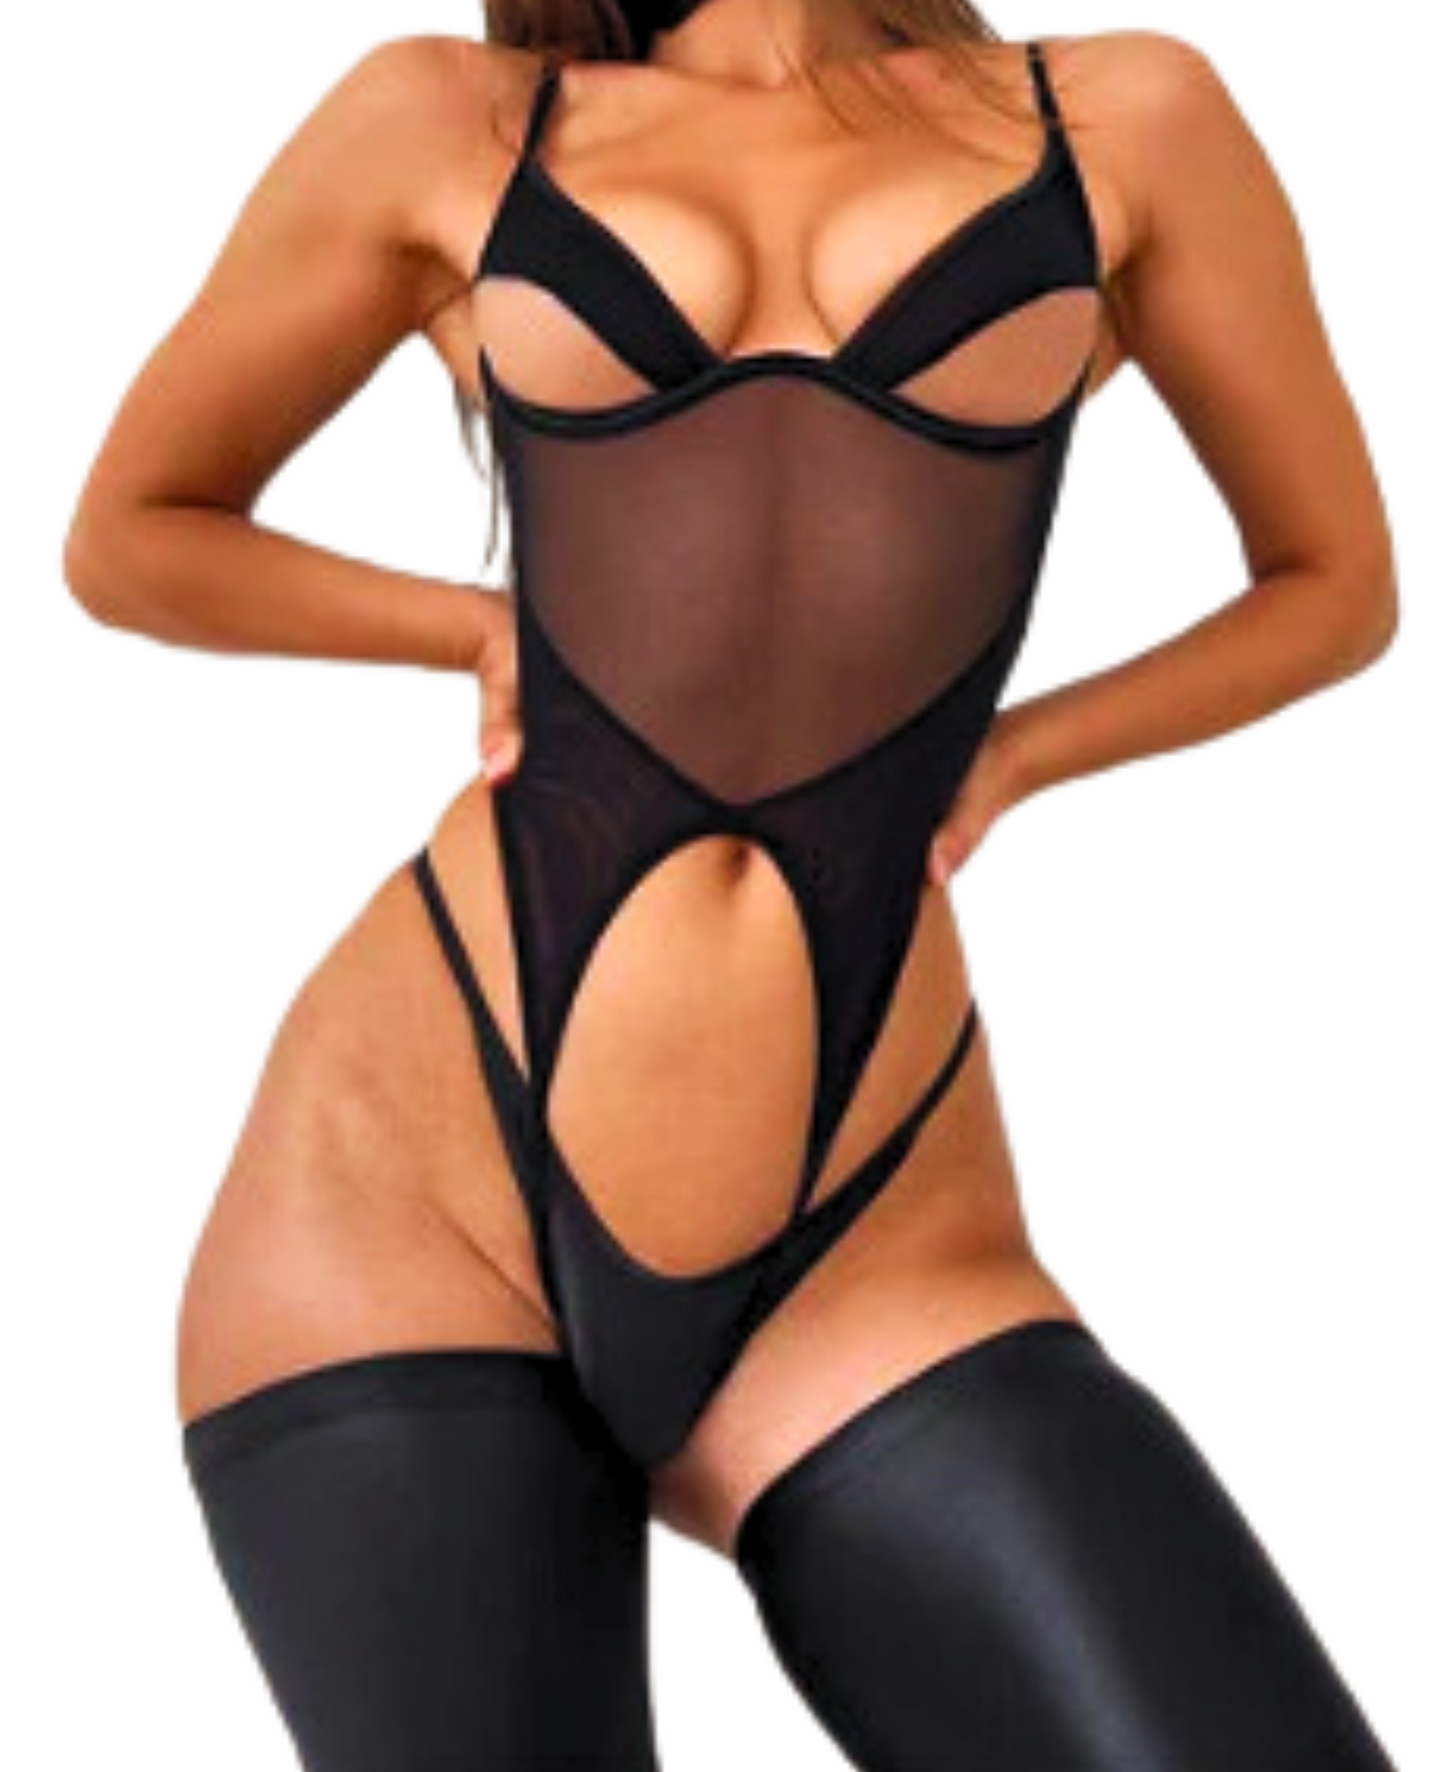 Lingerie With Stocking, Intimate Set Costume 3-Piece